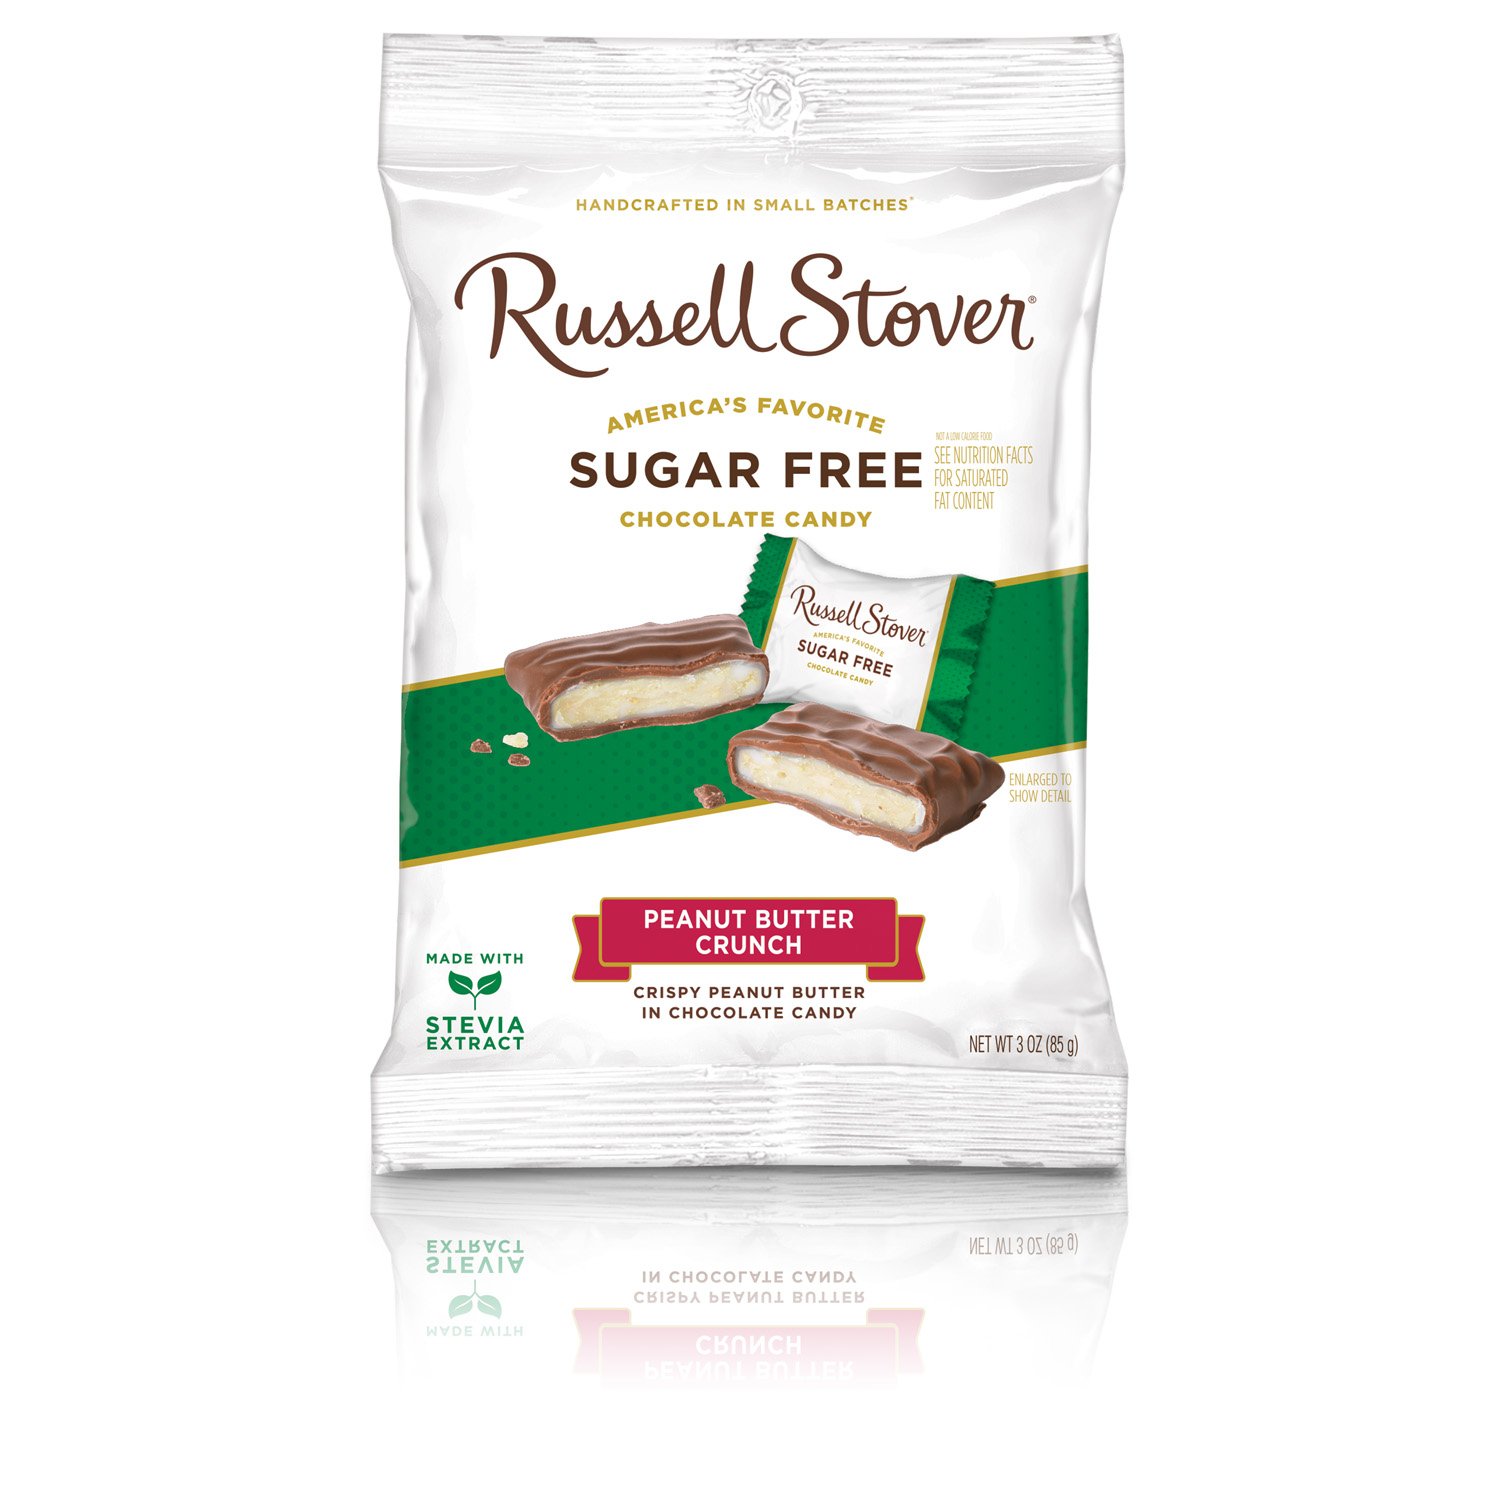 Russell Stover Toffee - Sugar free